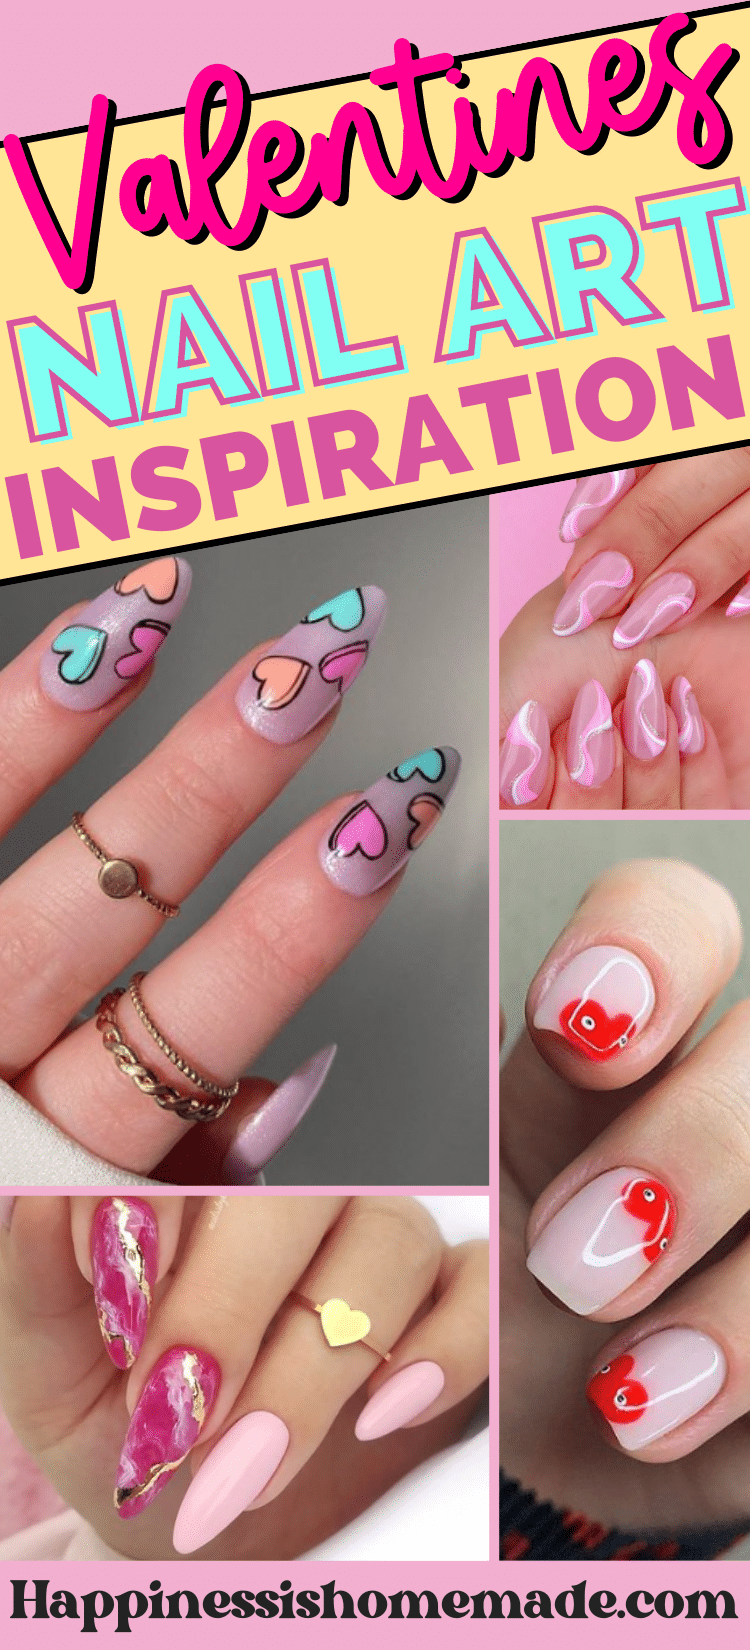 15 Best Rhinestone Nail Art Designs To Express Your Personality